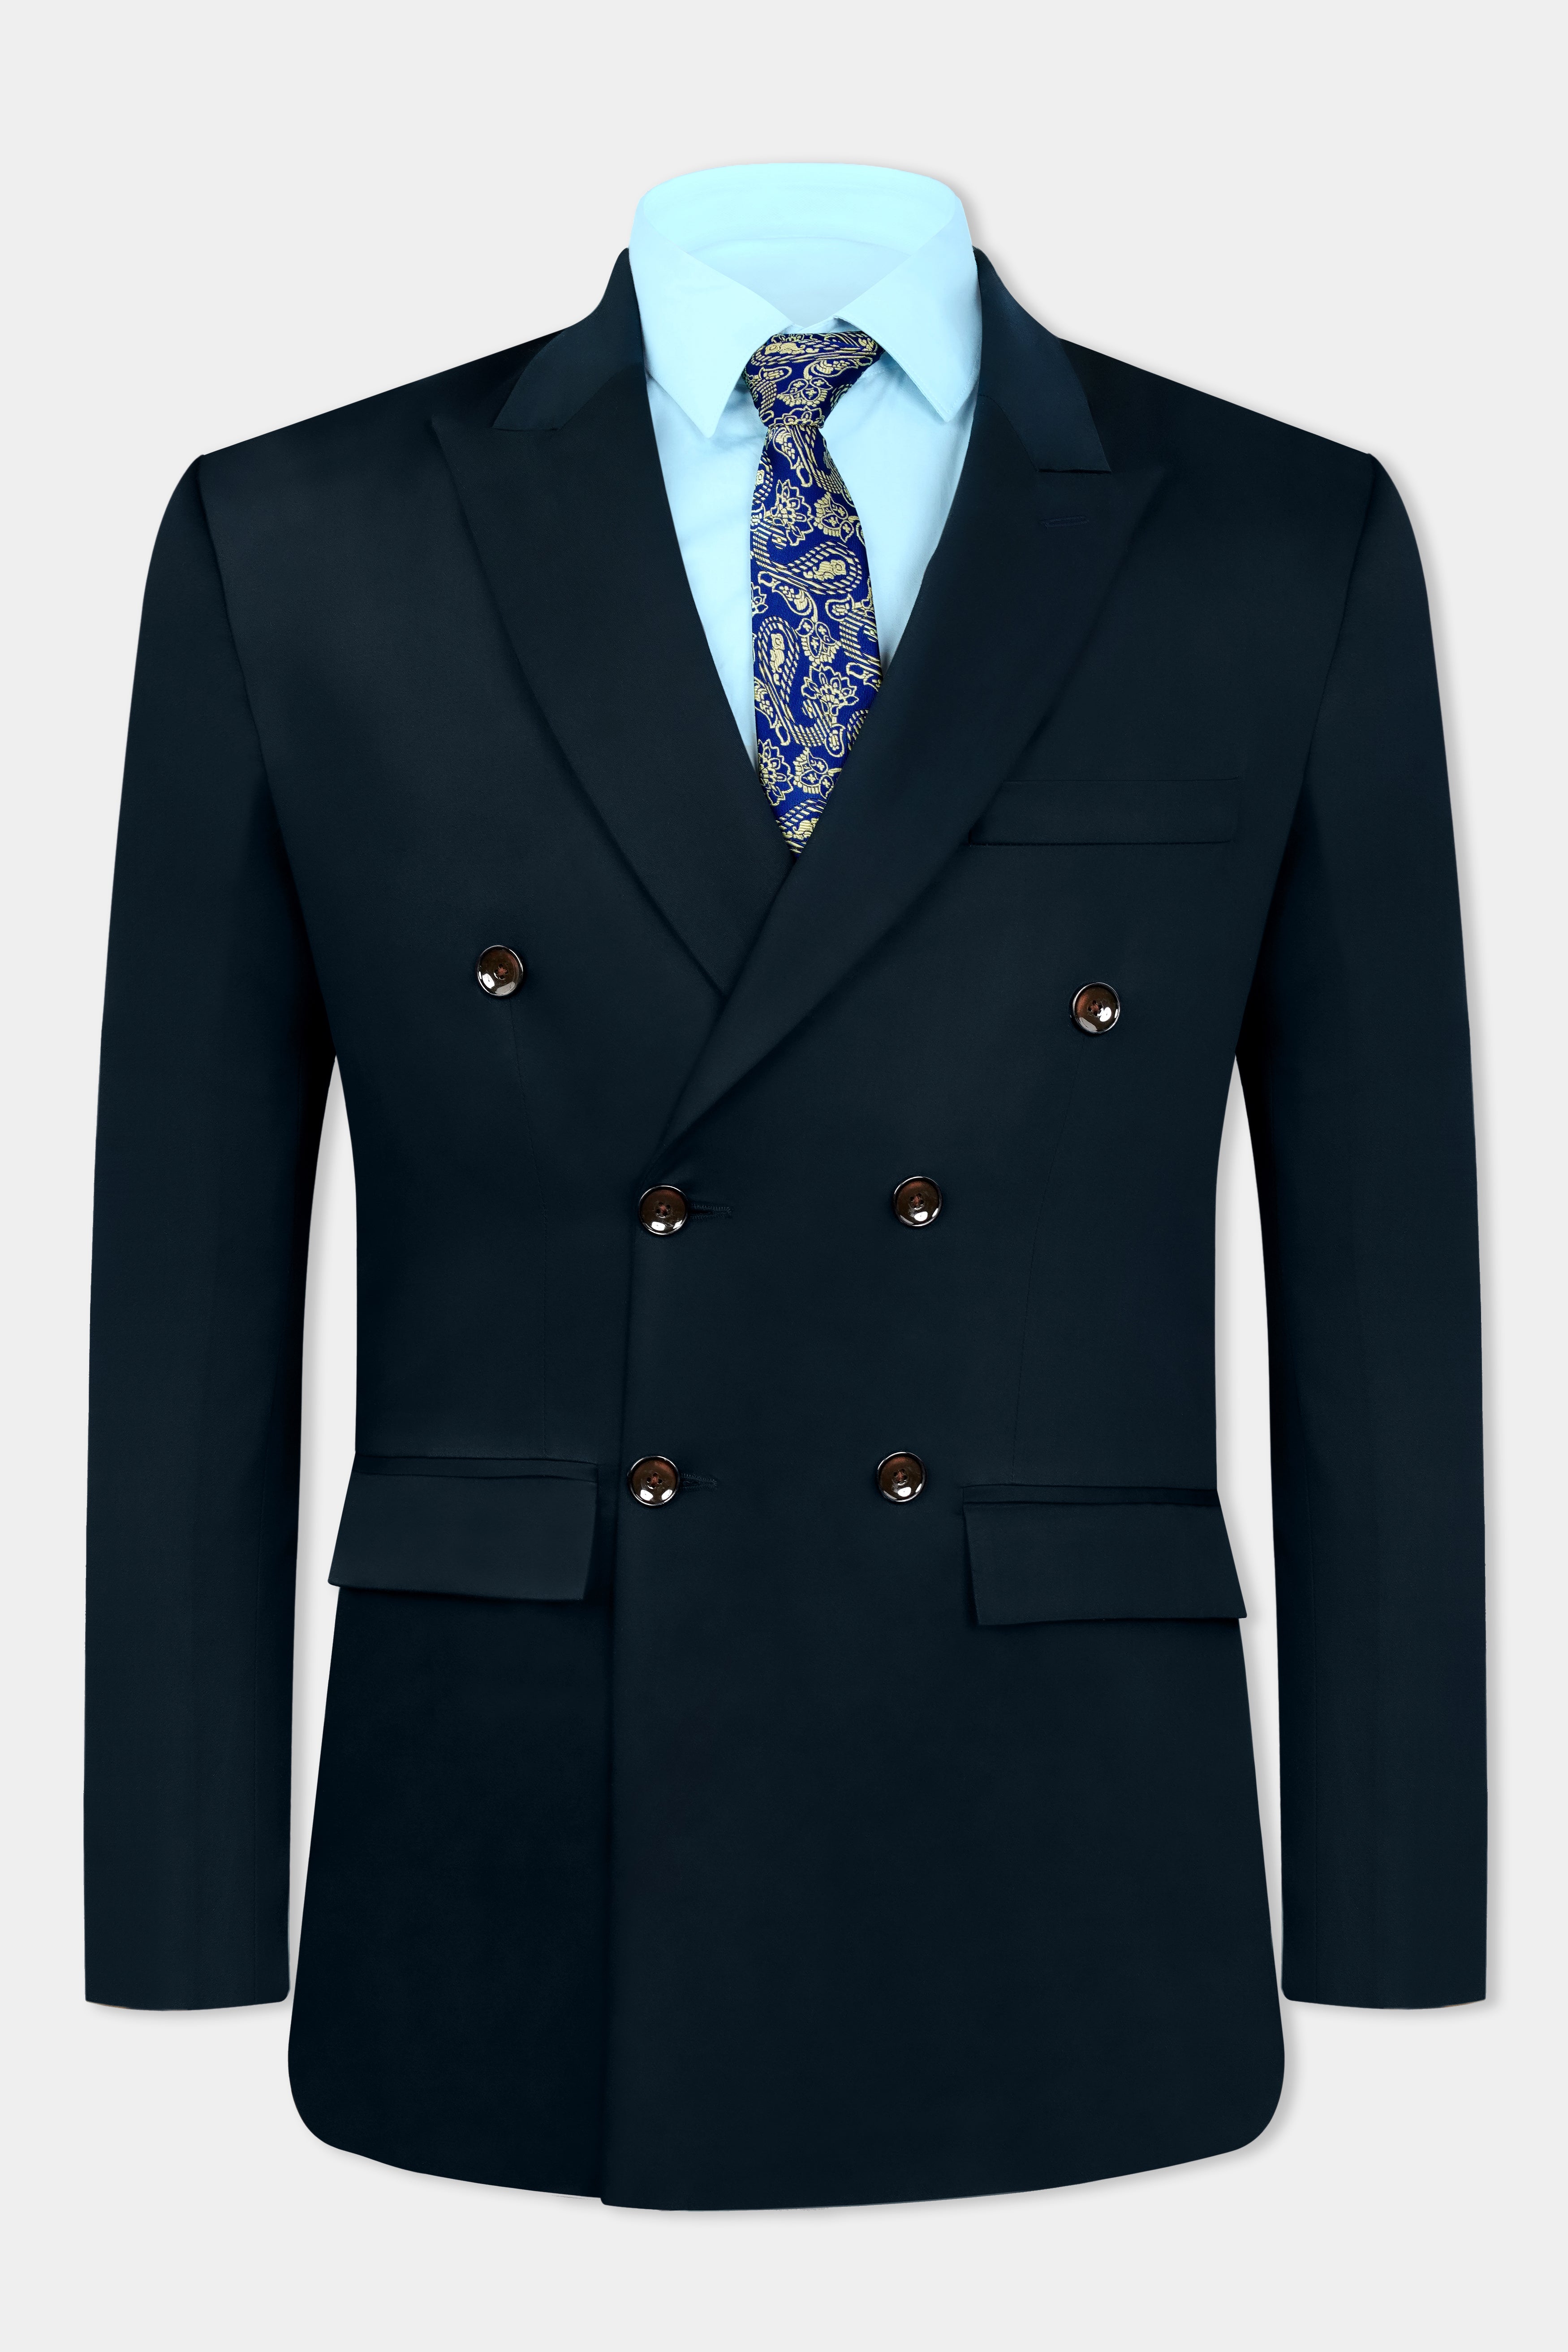 Bunker Blue Premium Cotton Double Breasted Suit ST3115-DB-36, ST3115-DB-38, ST3115-DB-40, ST3115-DB-42, ST3115-DB-44, ST3115-DB-46, ST3115-DB-48, ST3115-DB-50, ST3115-DB-52, ST3115-DB-54, ST3115-DB-56, ST3115-DB-58, ST3115-DB-60